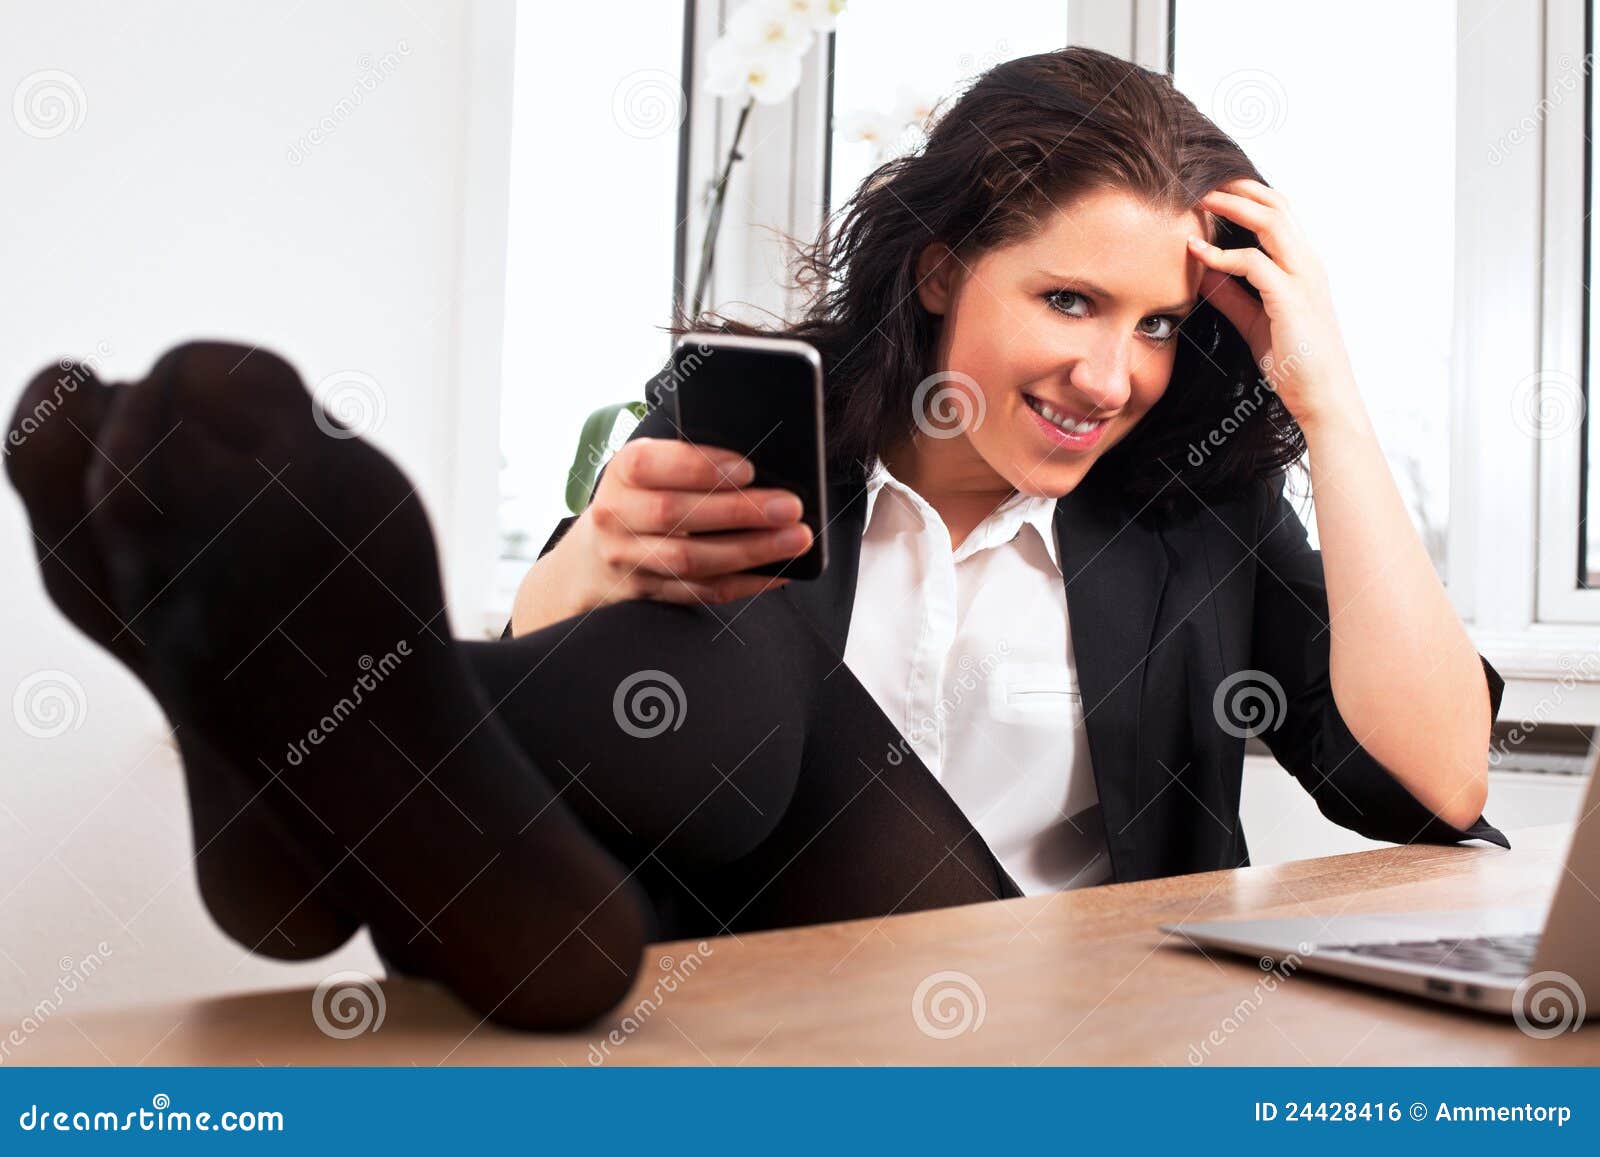 Businesswoman Relaxing At The Office Royalty Free Stock